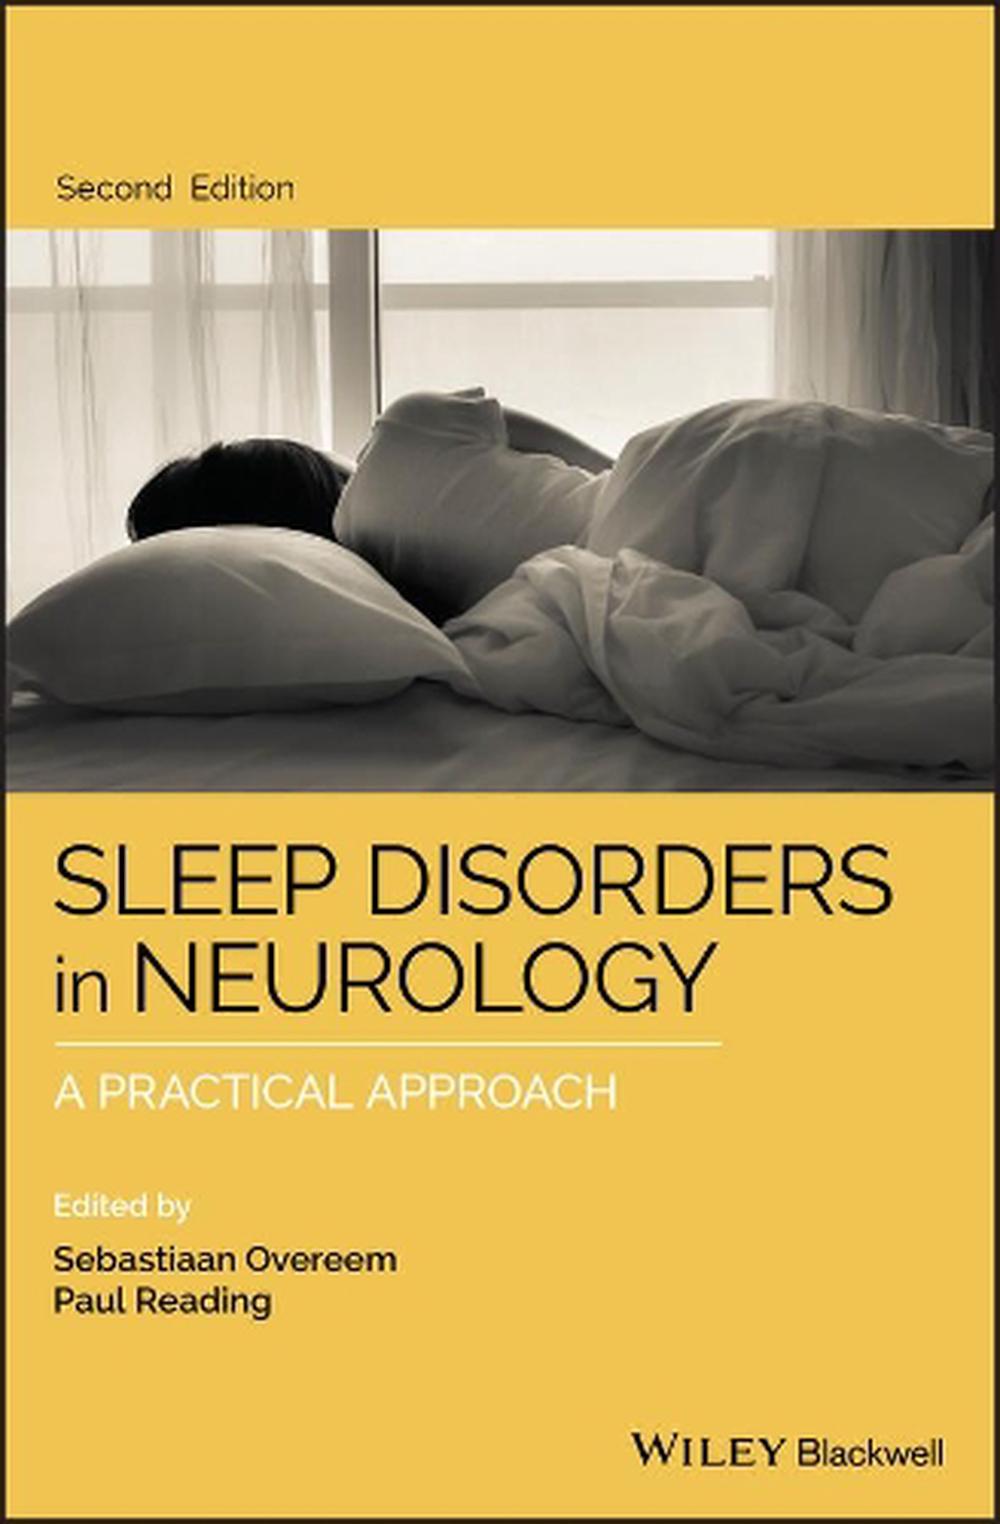 research articles on sleep disorders